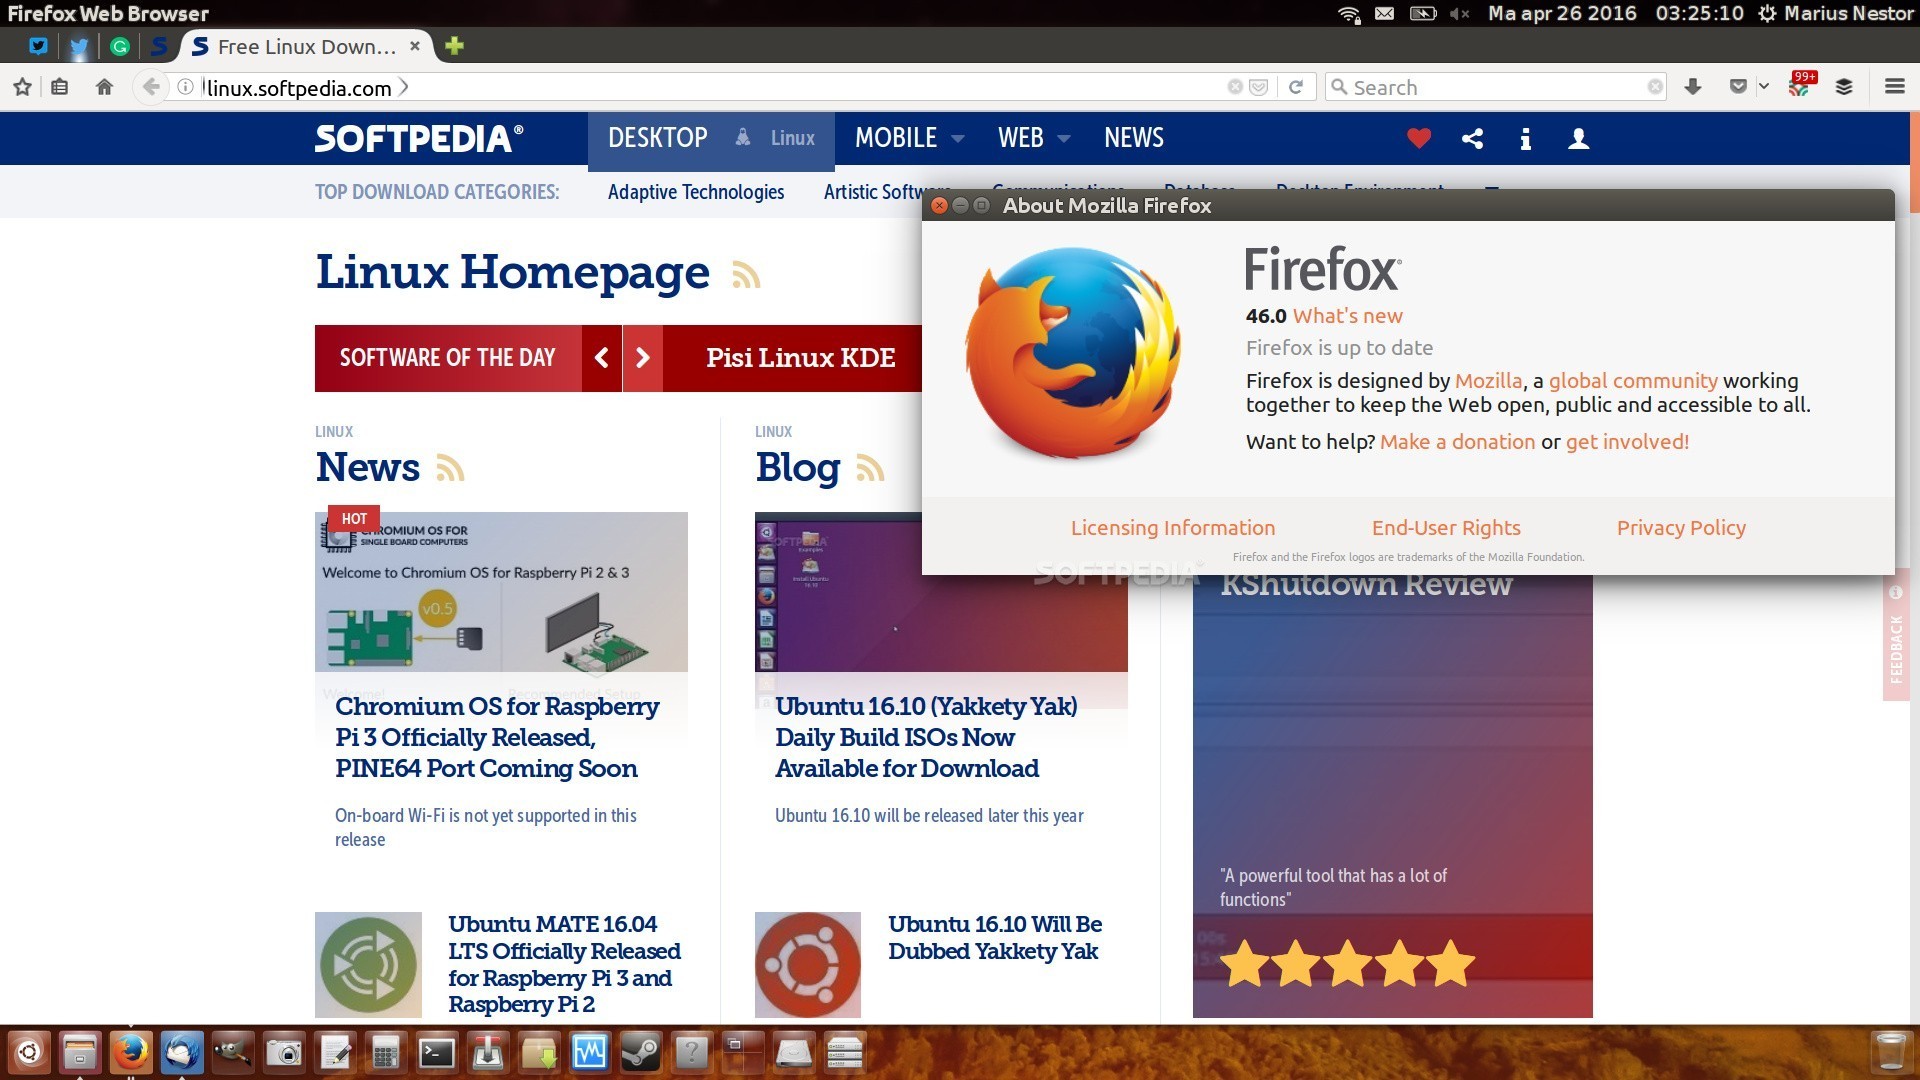 How to Configure a Proxy Server in Firefox - HowToGeek